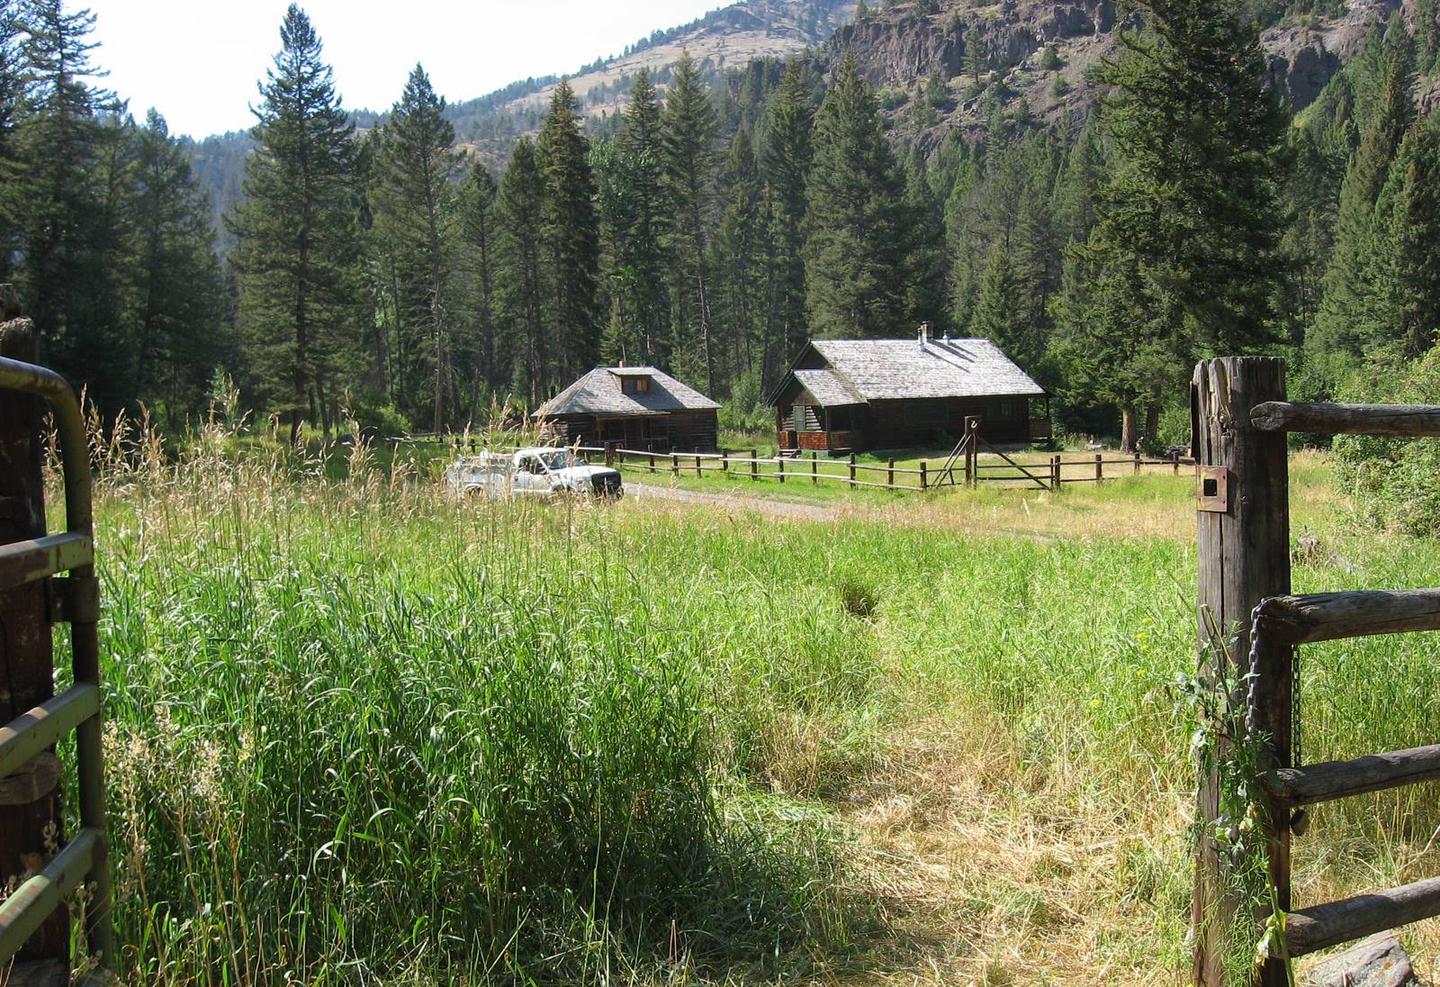 A corral is available.Across the meadow lies the cabin